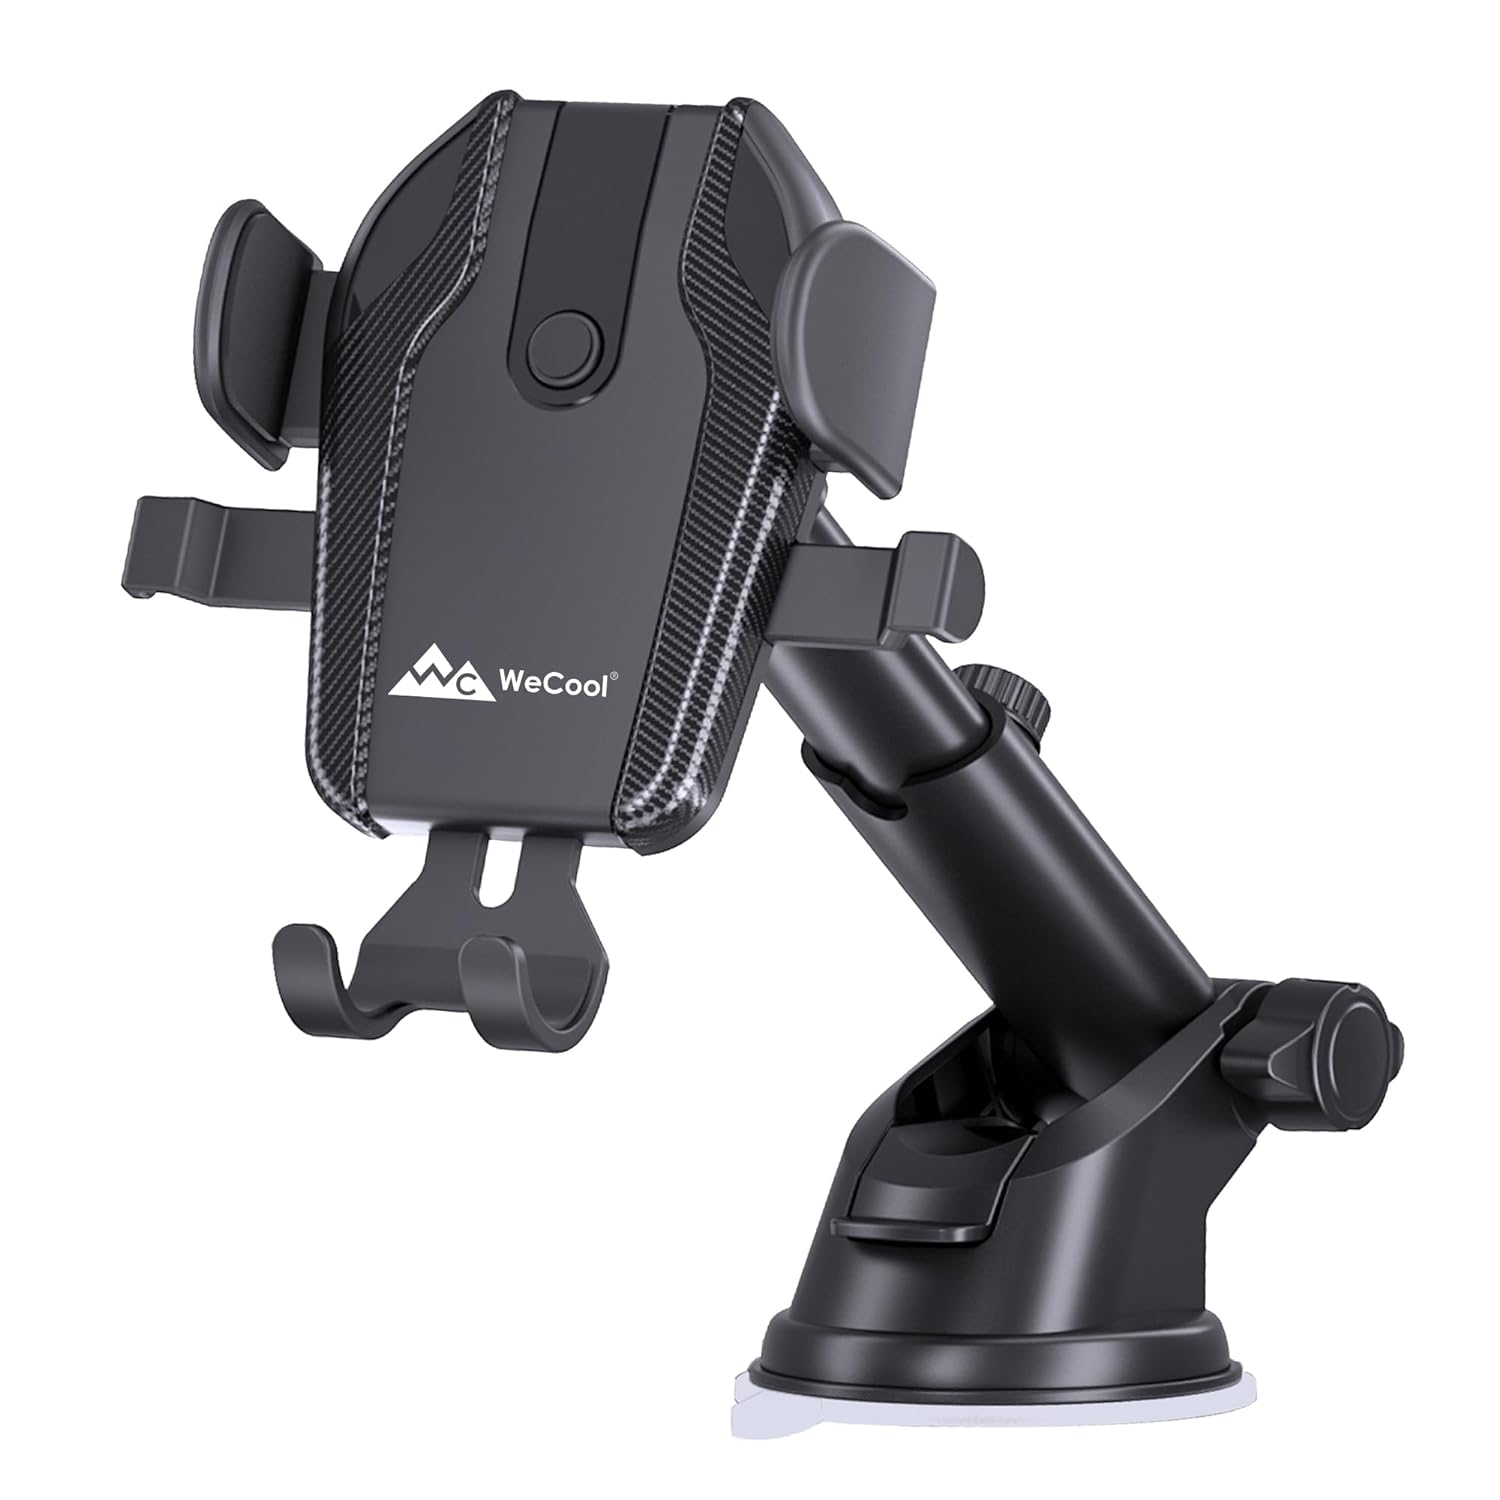 Car Mobile Holder, 360° Rotational, Strong Suction Cup for 4 to 6 Devices, Wildshield & Dashboard Mobile Holder